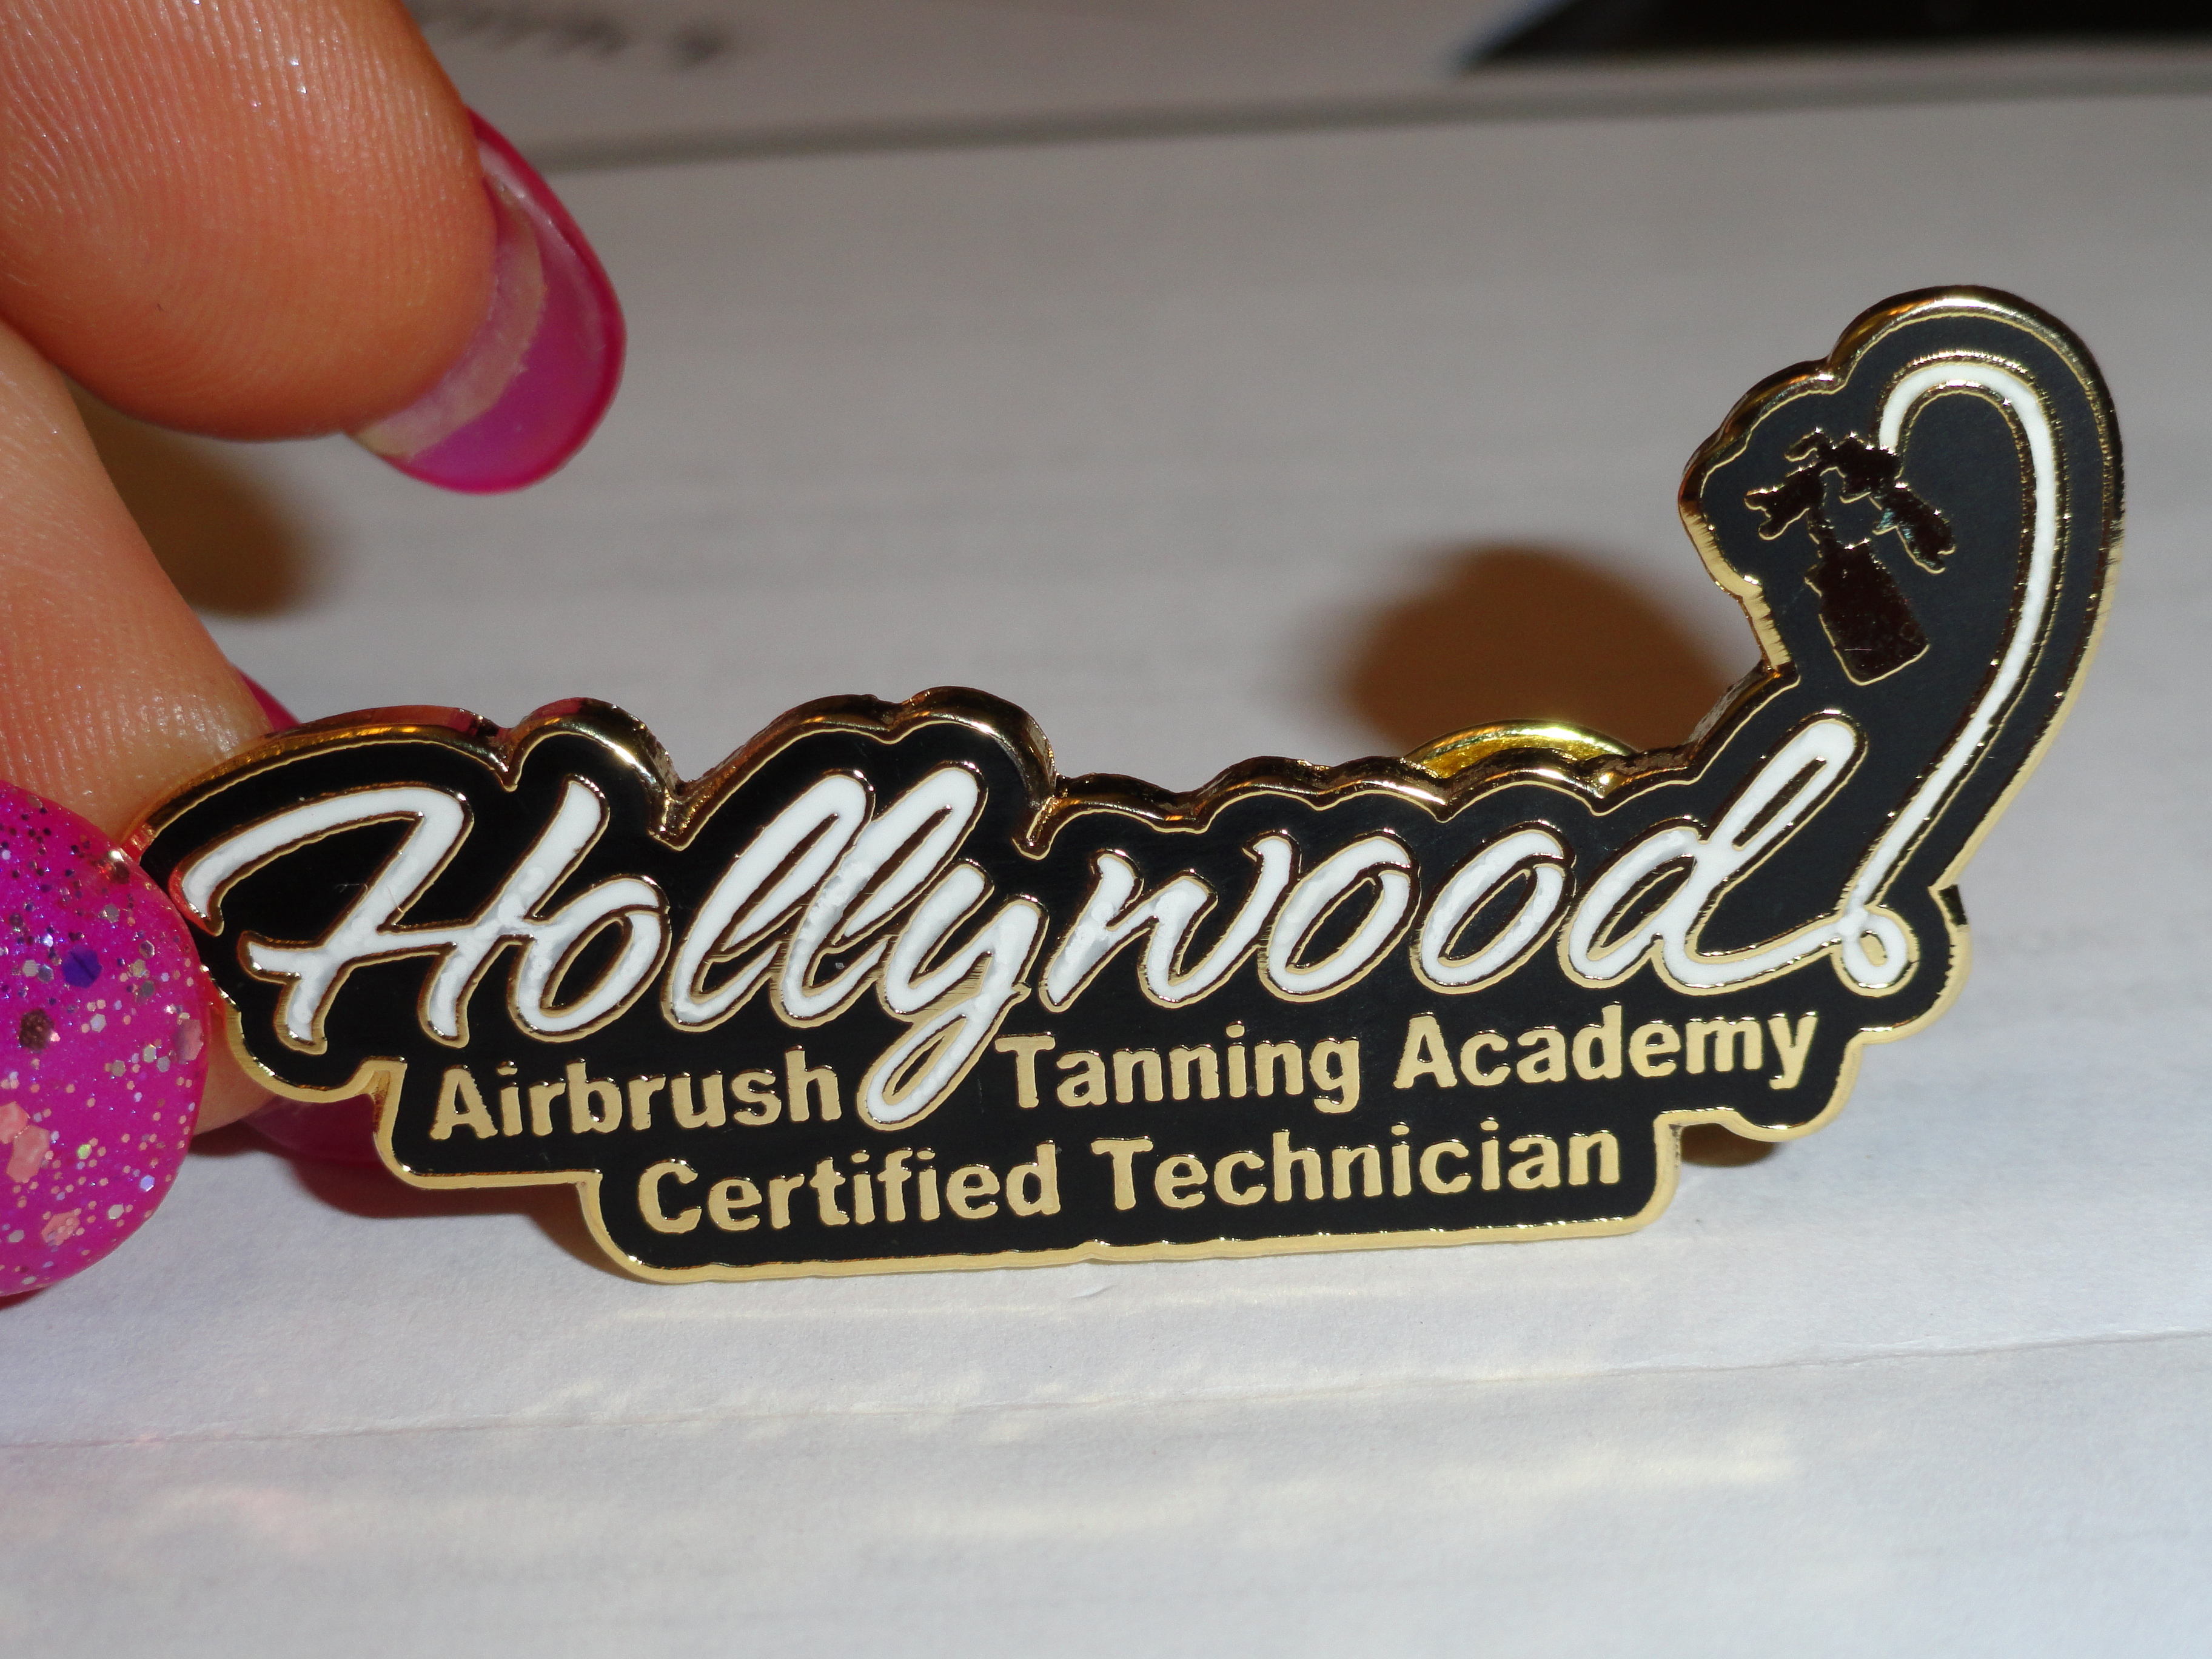 Southern California Based Spray Tanning Training Academy Announces Unique Identity with The Arrival of Graduate Lapel Pins.